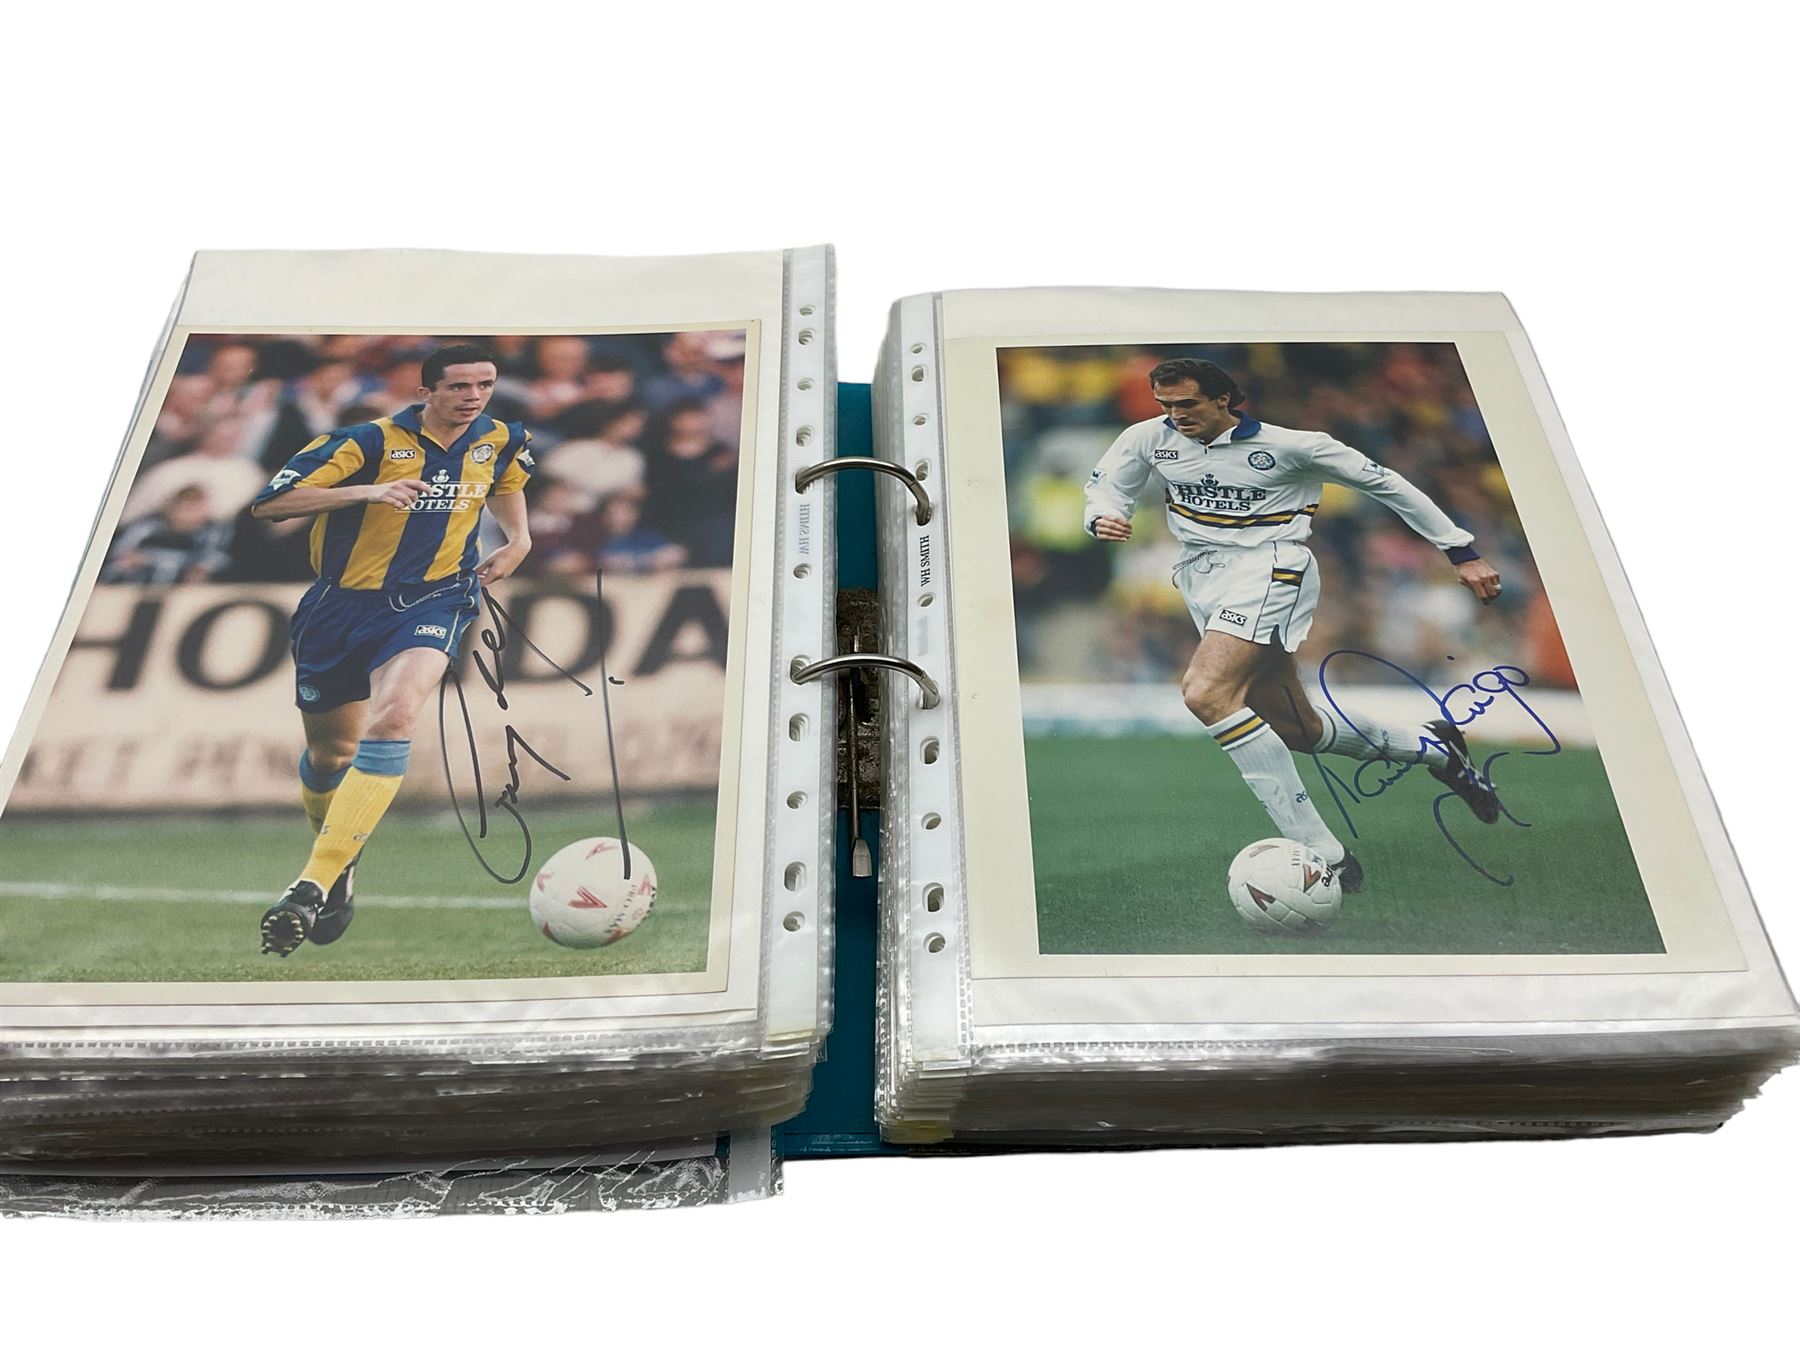 Leeds United football club - various autographs and signatures including Peter Lorimer - Image 10 of 10